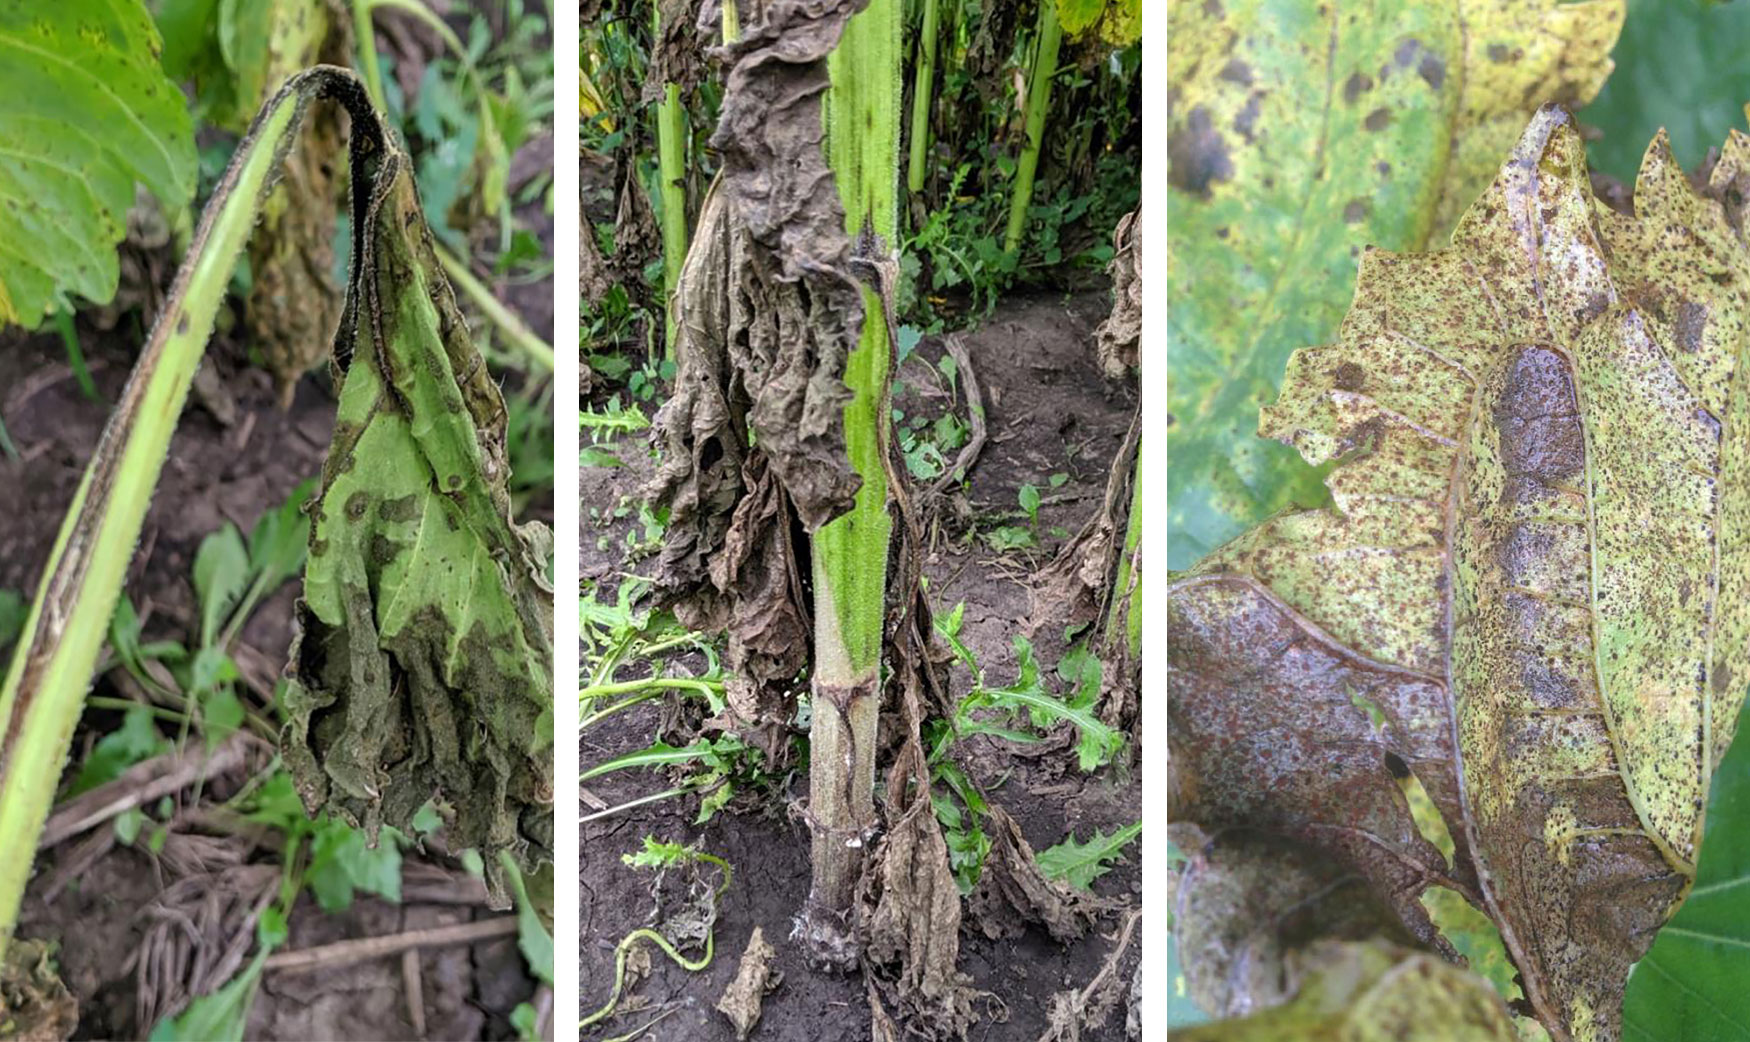 Symptoms of three emerging sunflower diseases. From the left: Bacterial Stem Rot, Sclerotinia Basal Rot, and Sunflower Rust.